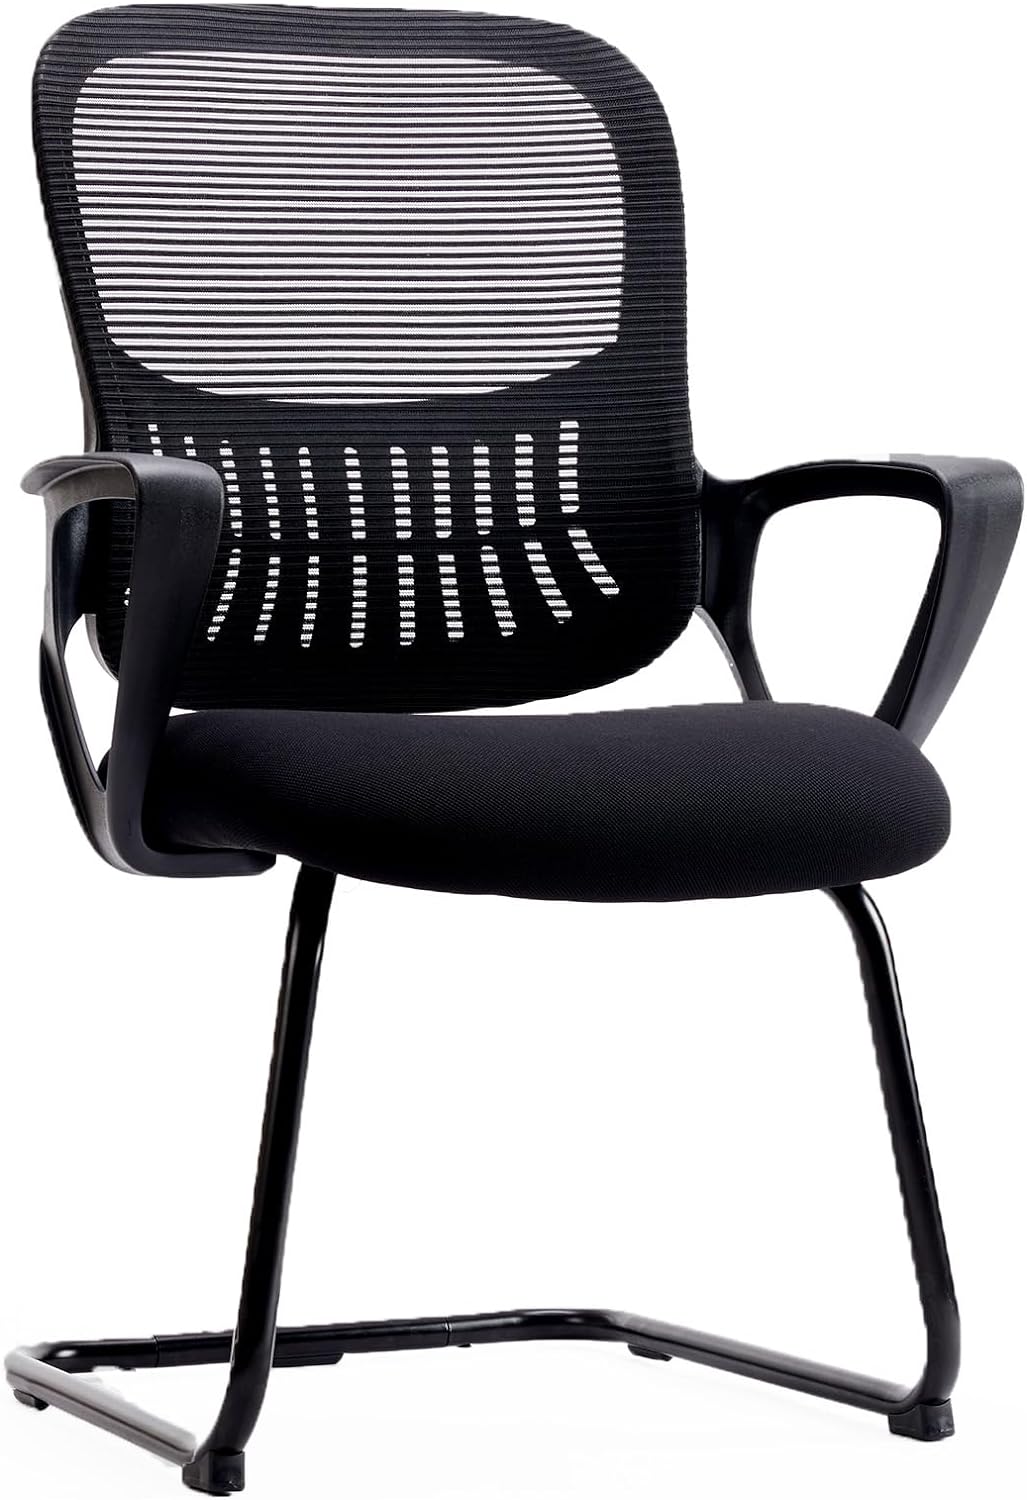 Home Office Chair Ergonomic Desk Chair Mesh Computer Chair with